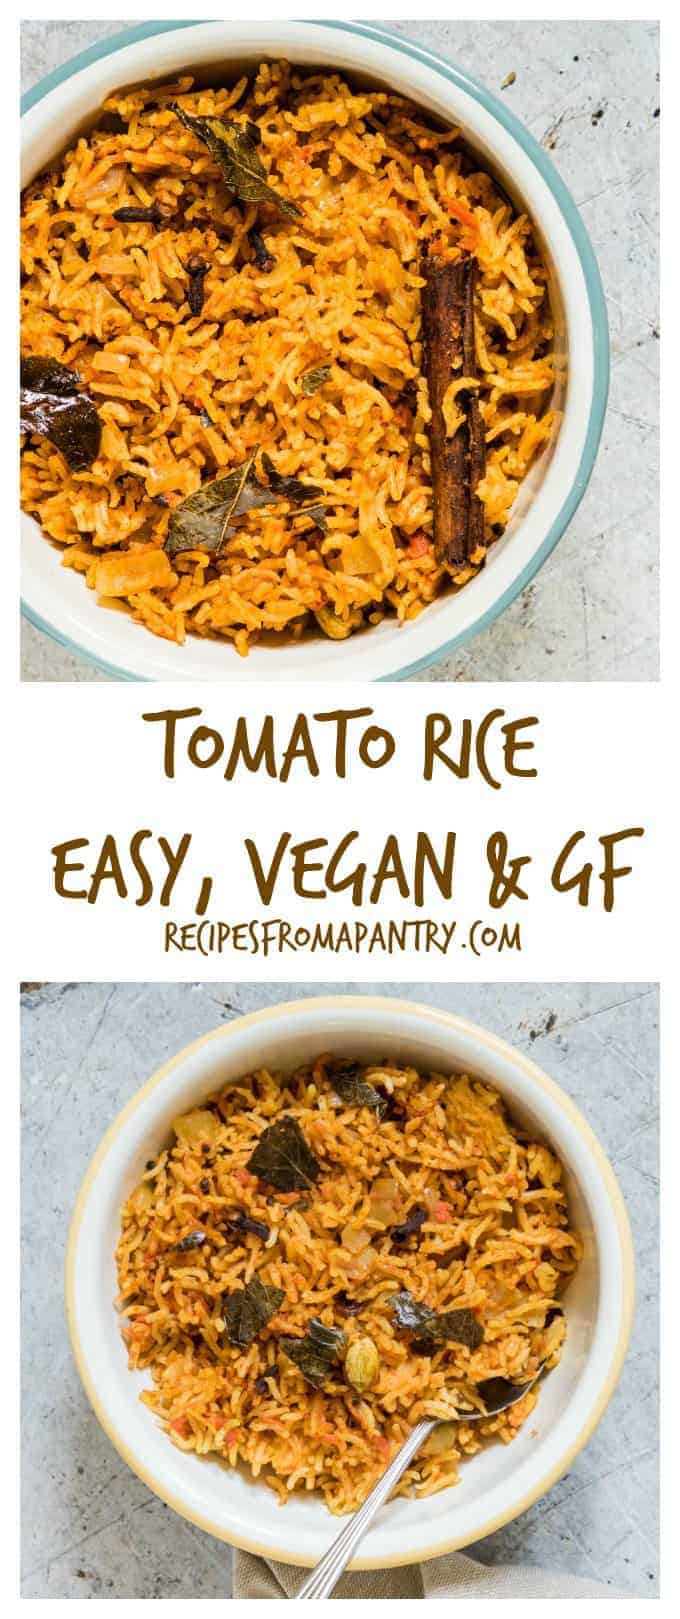 Tomato Rice Recipe - Recipes From A Pantry